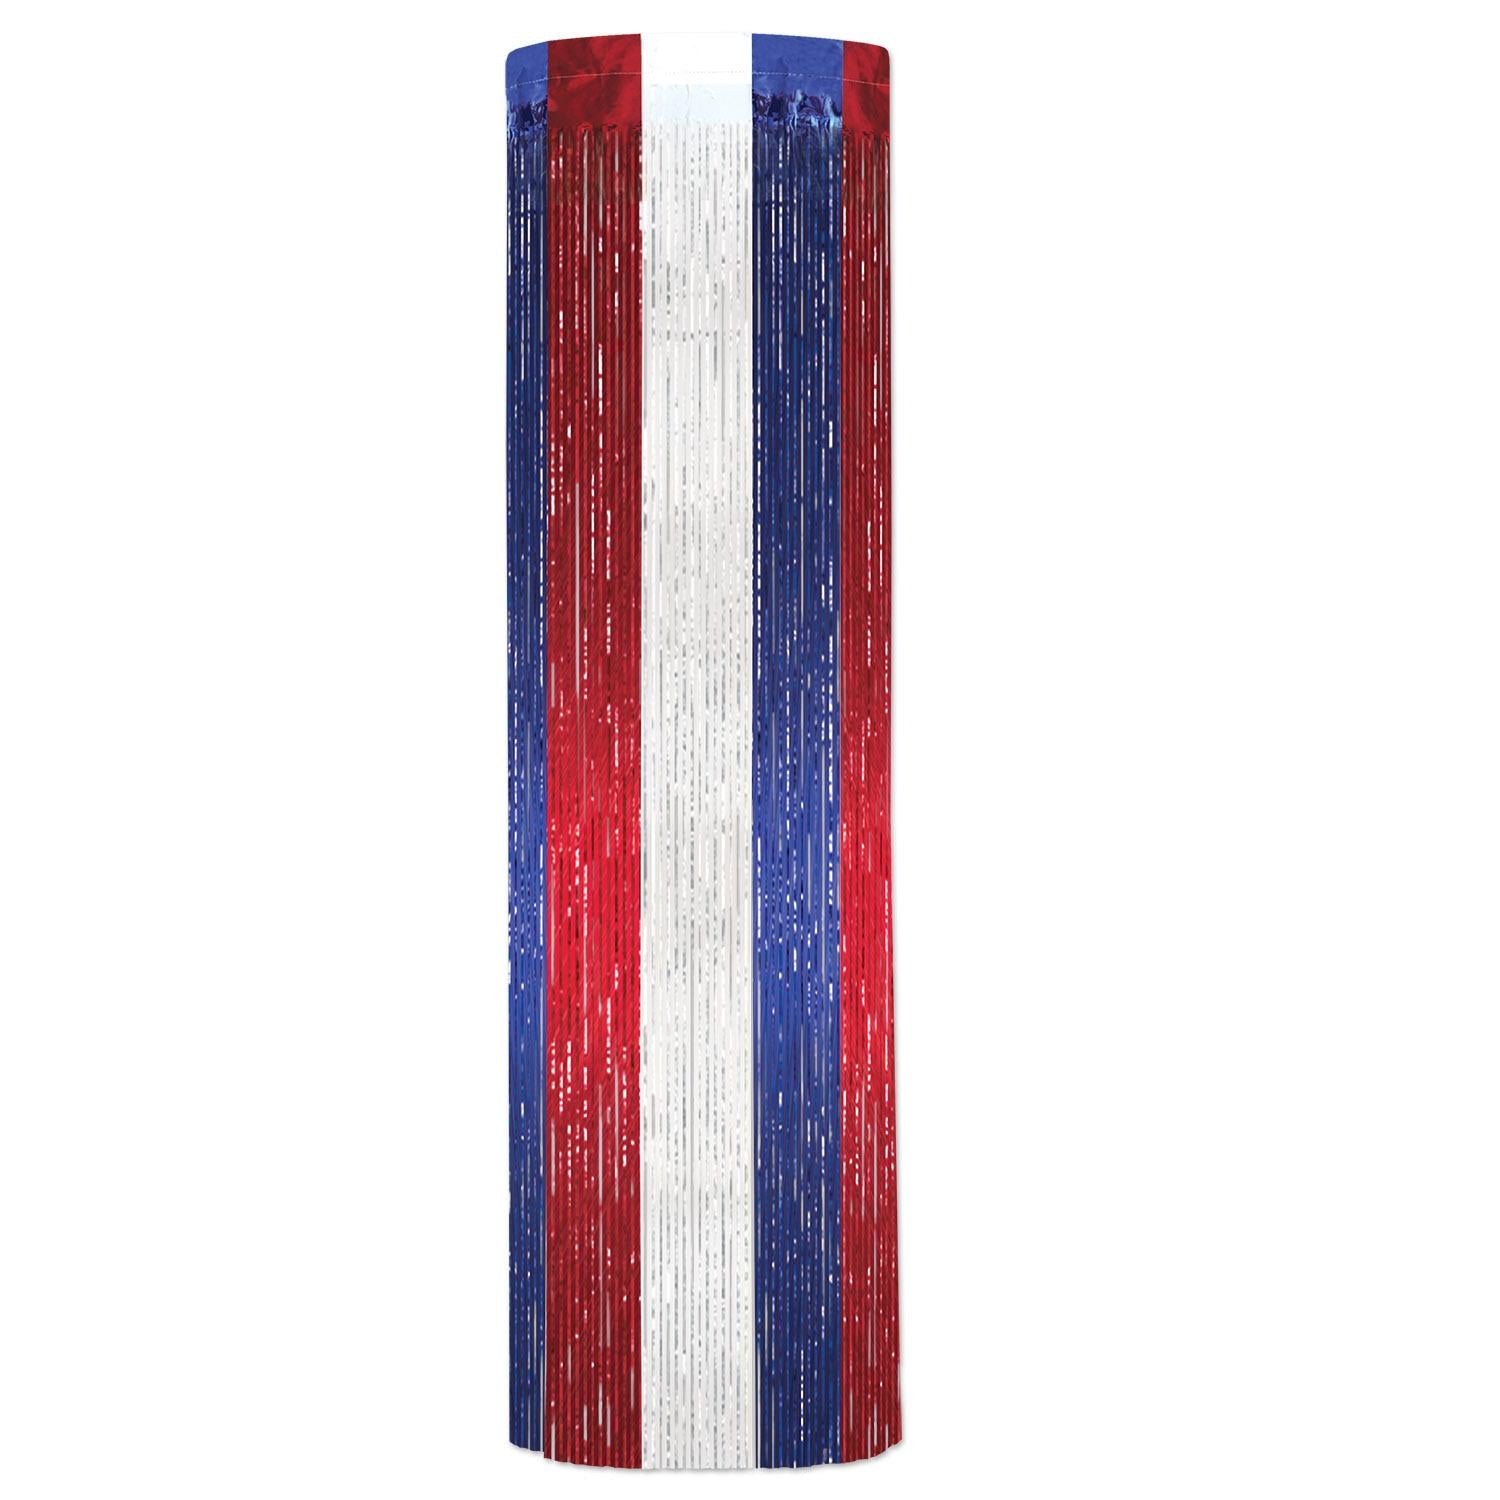 Beistle 1-Ply Gleam 'N Party Column - red - white - blue